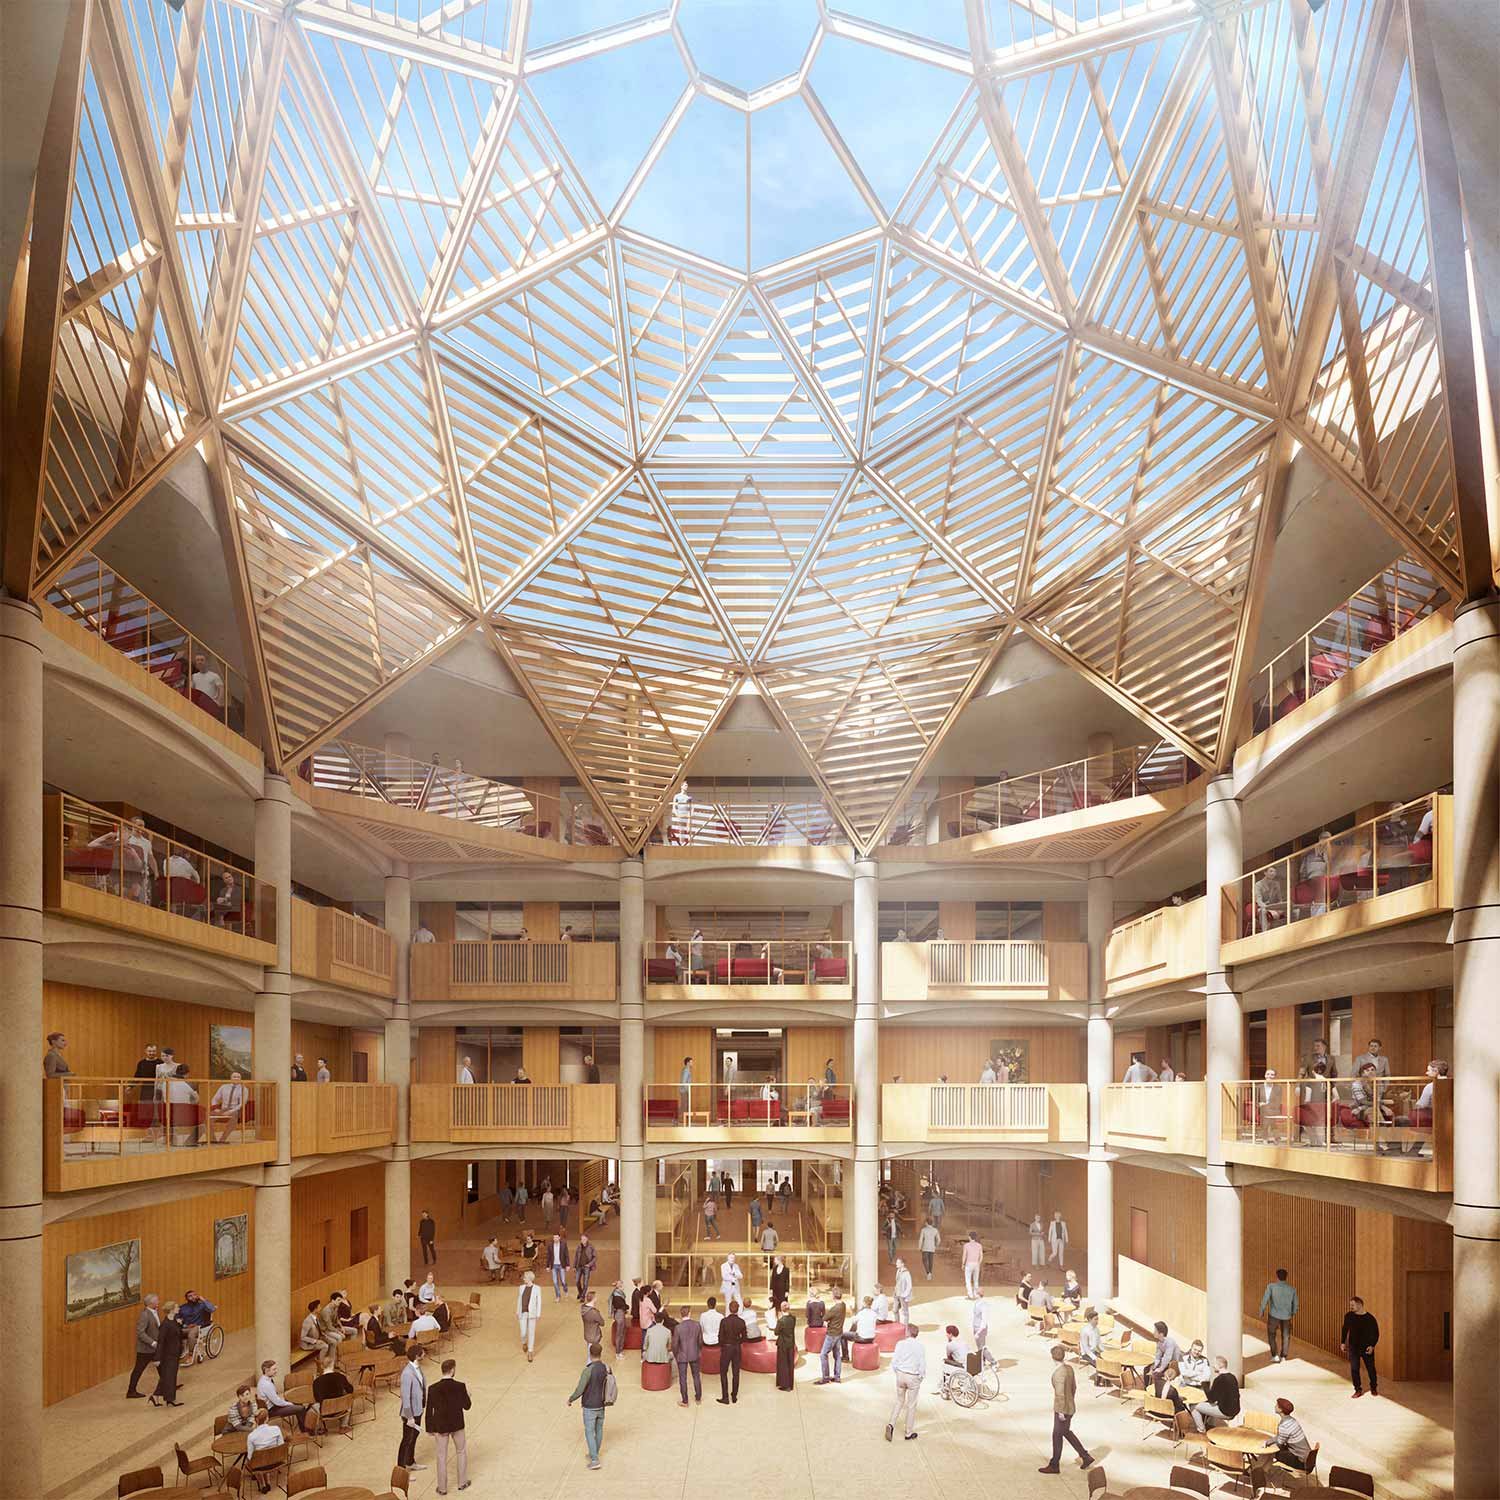 Stephen A. Schwarzman Centre for the Humanities interior shot showing the central dome